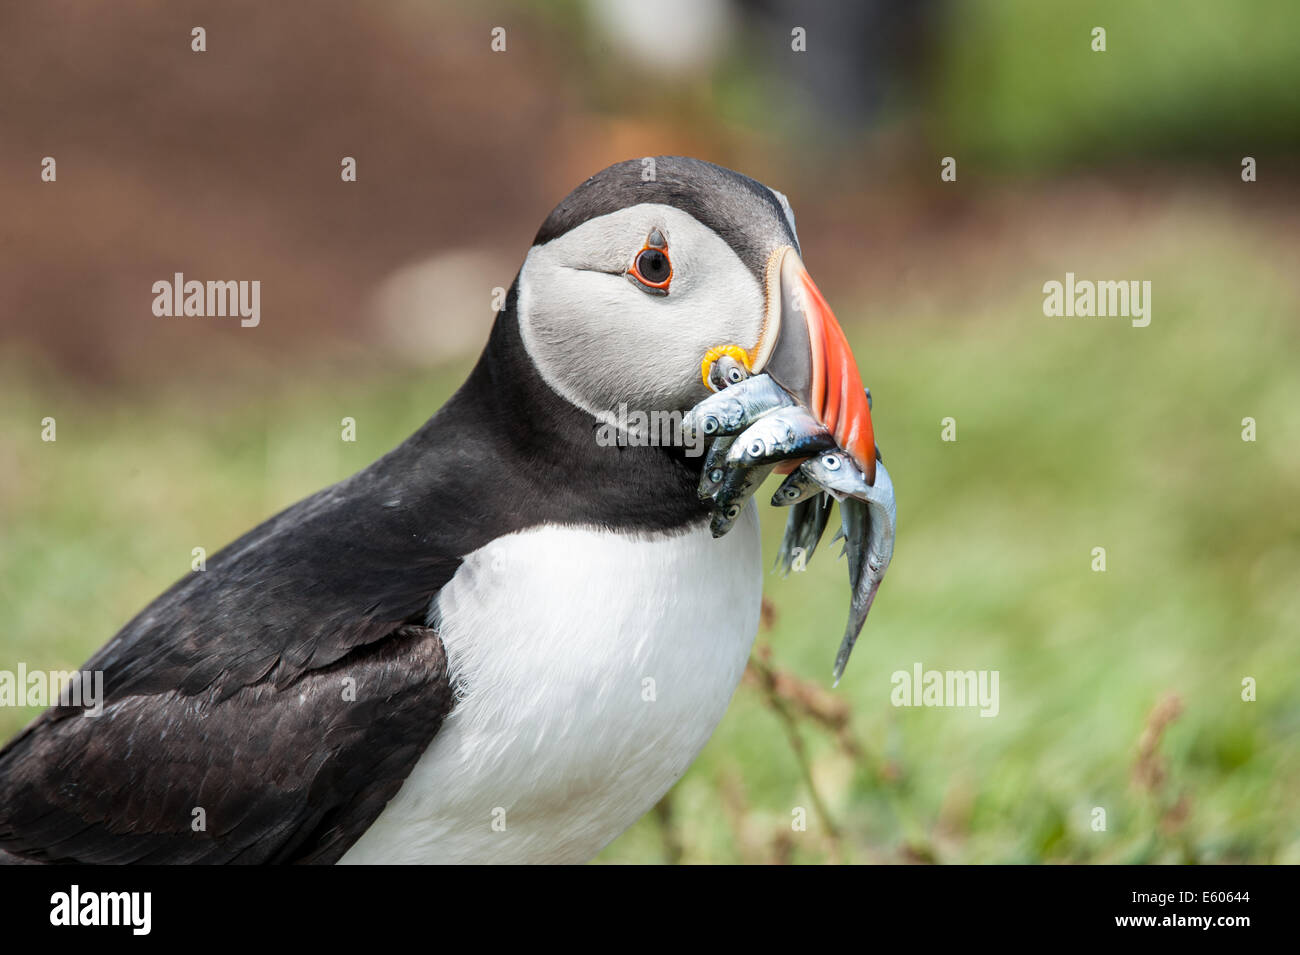 An Atlantic puffin (Fratercula arctica) with a beak full of fish as seen on the island of Lunga off Scotland's west coast Stock Photo